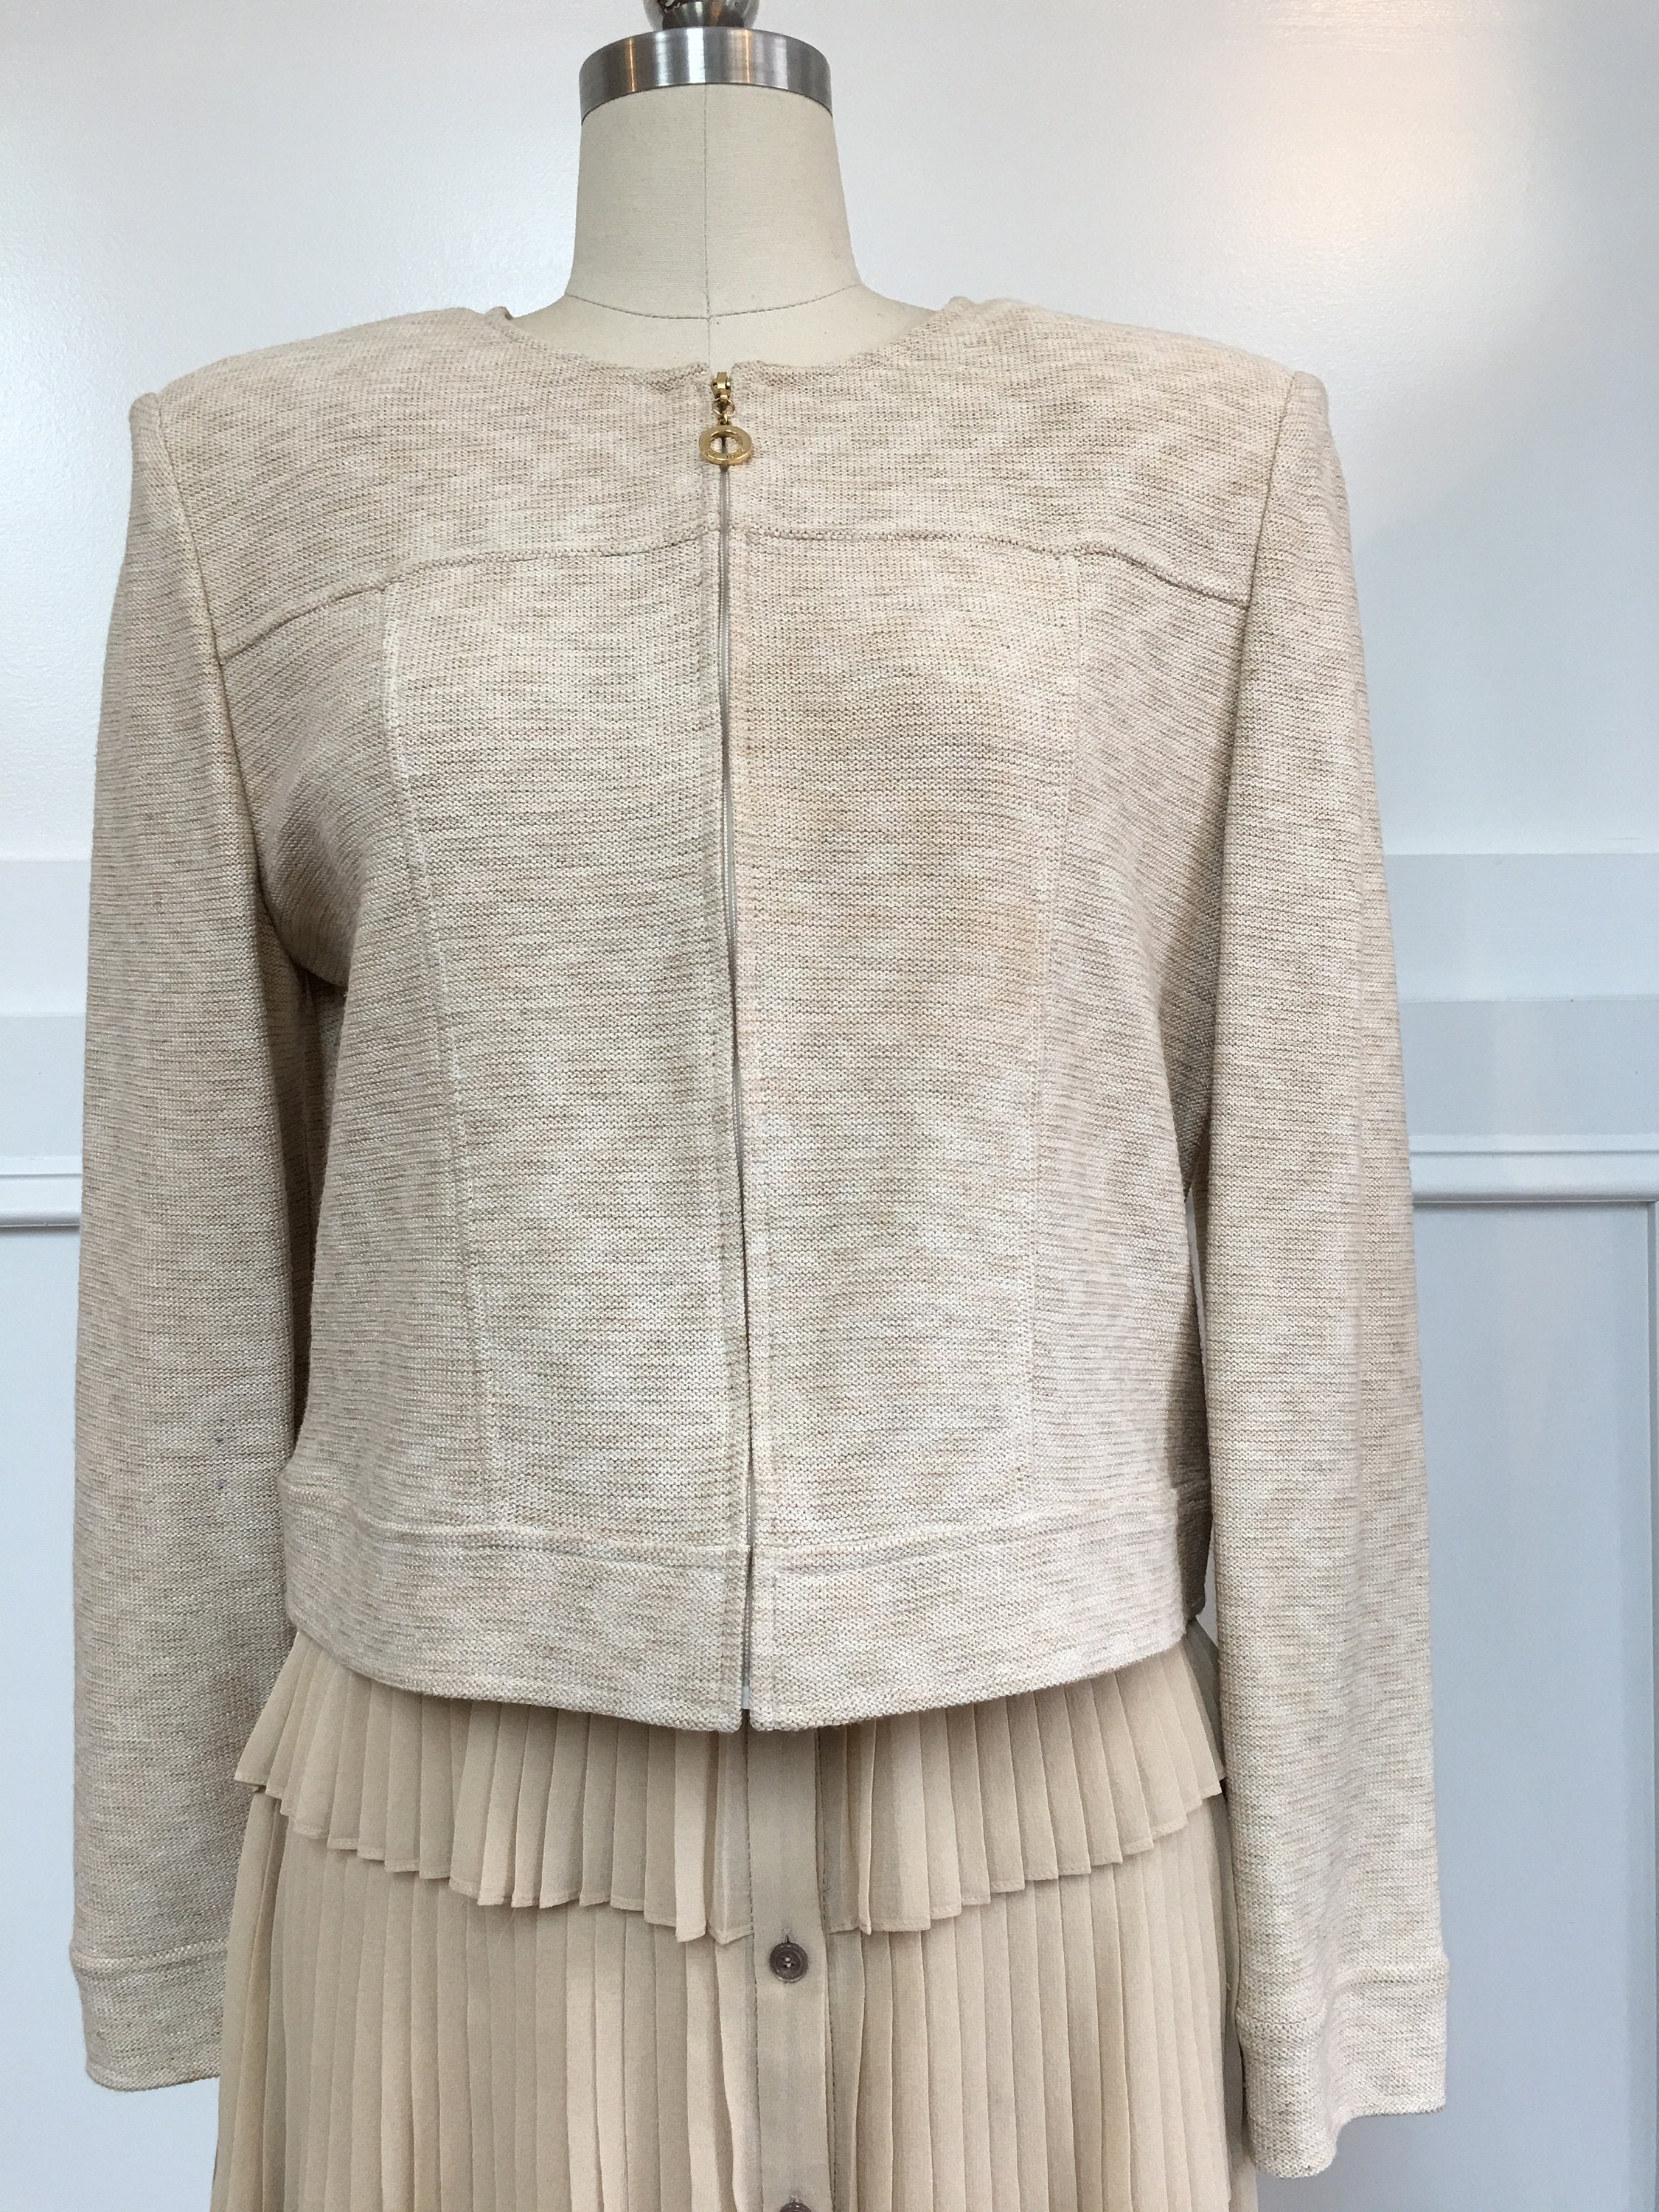 Classic St. John Collection by Marie Gray 1990s Taupe Knit Jacket